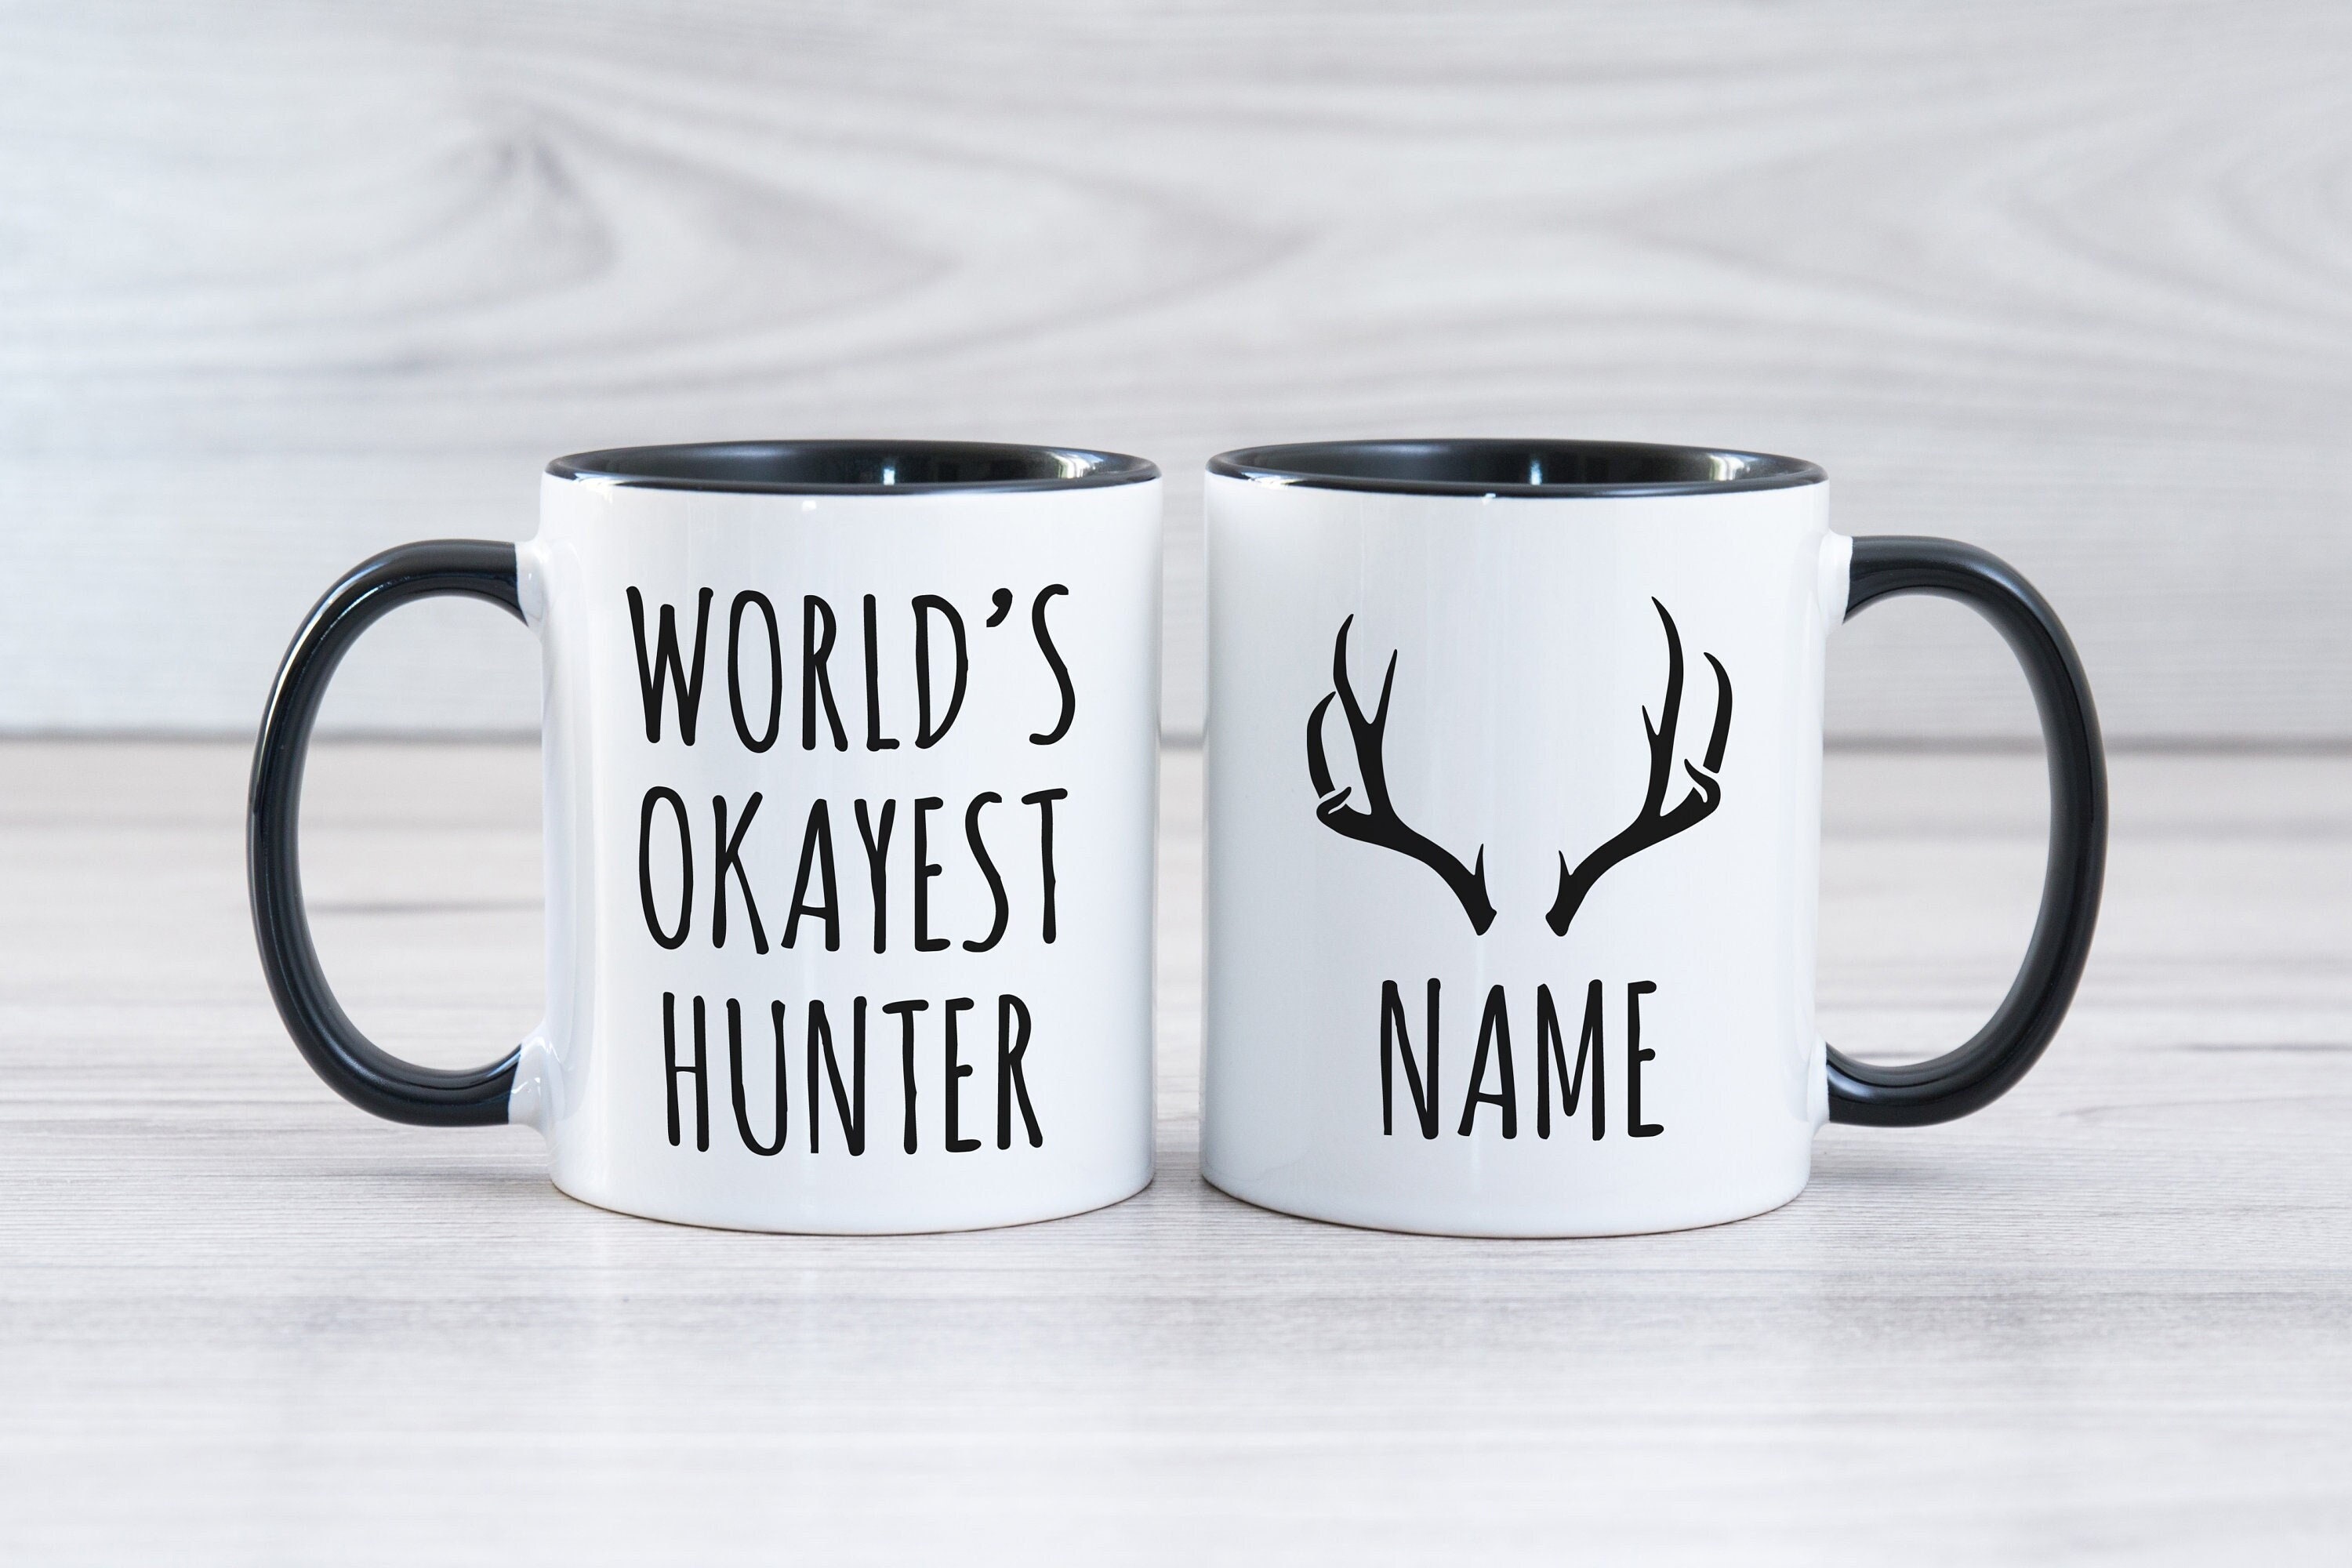 Moose Hunting Travel Mug - Funny Moose Hunters Husband Coffee Cup for  Married / Engaged Men - Hunt Gag Gift for Him from Wife or Bride, Vacuum  cup